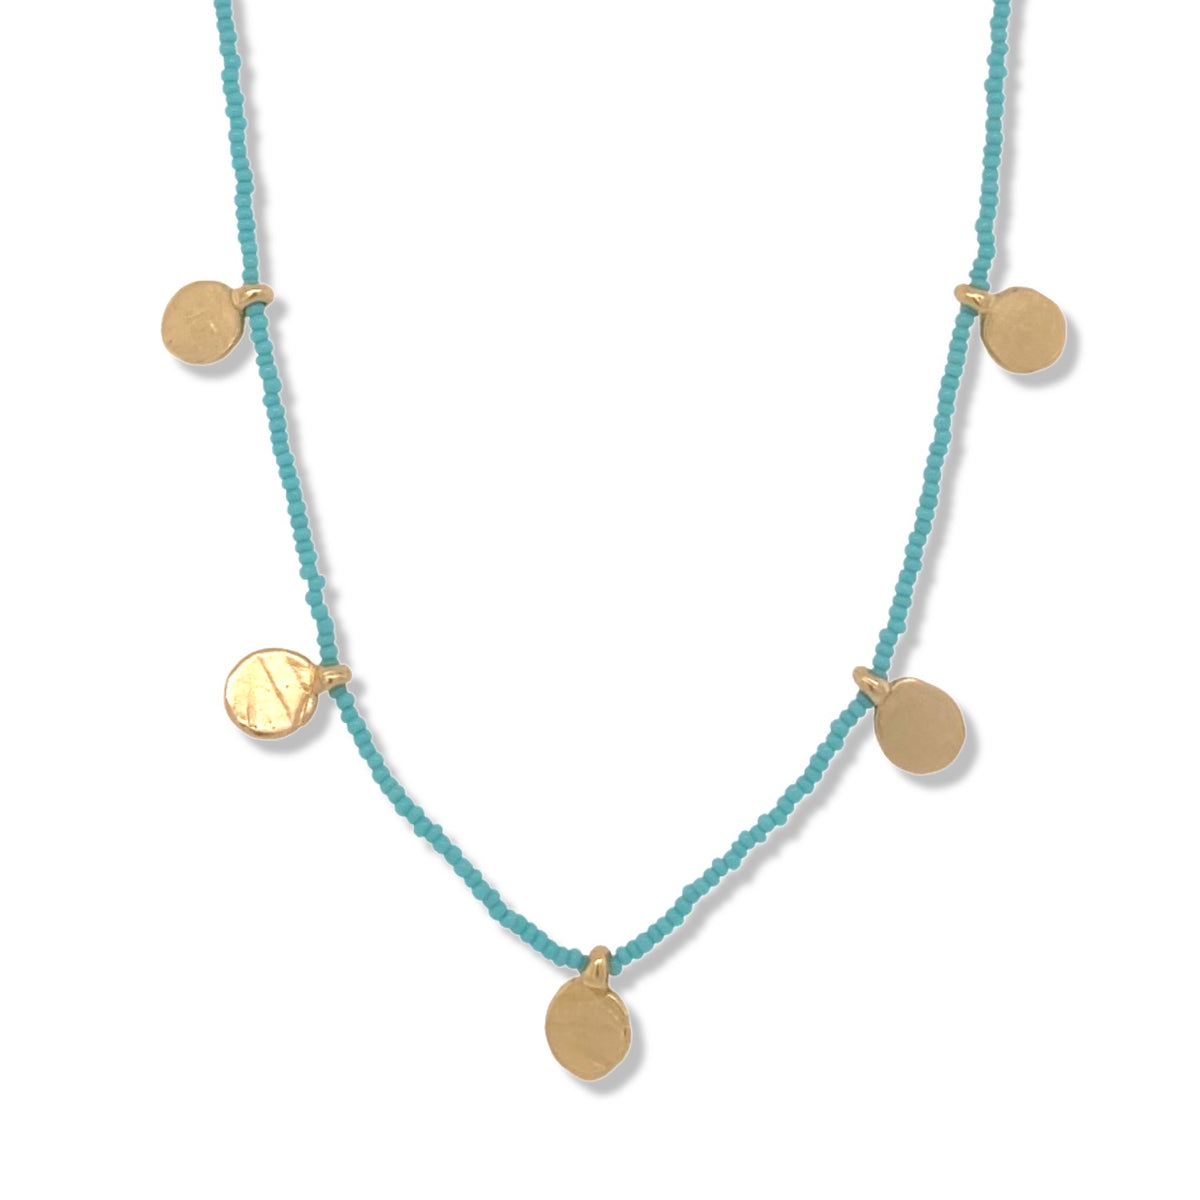 Dot Charm Necklace in Gold on Turquoise Beads | Keely Smith Jewelry | Nantucket